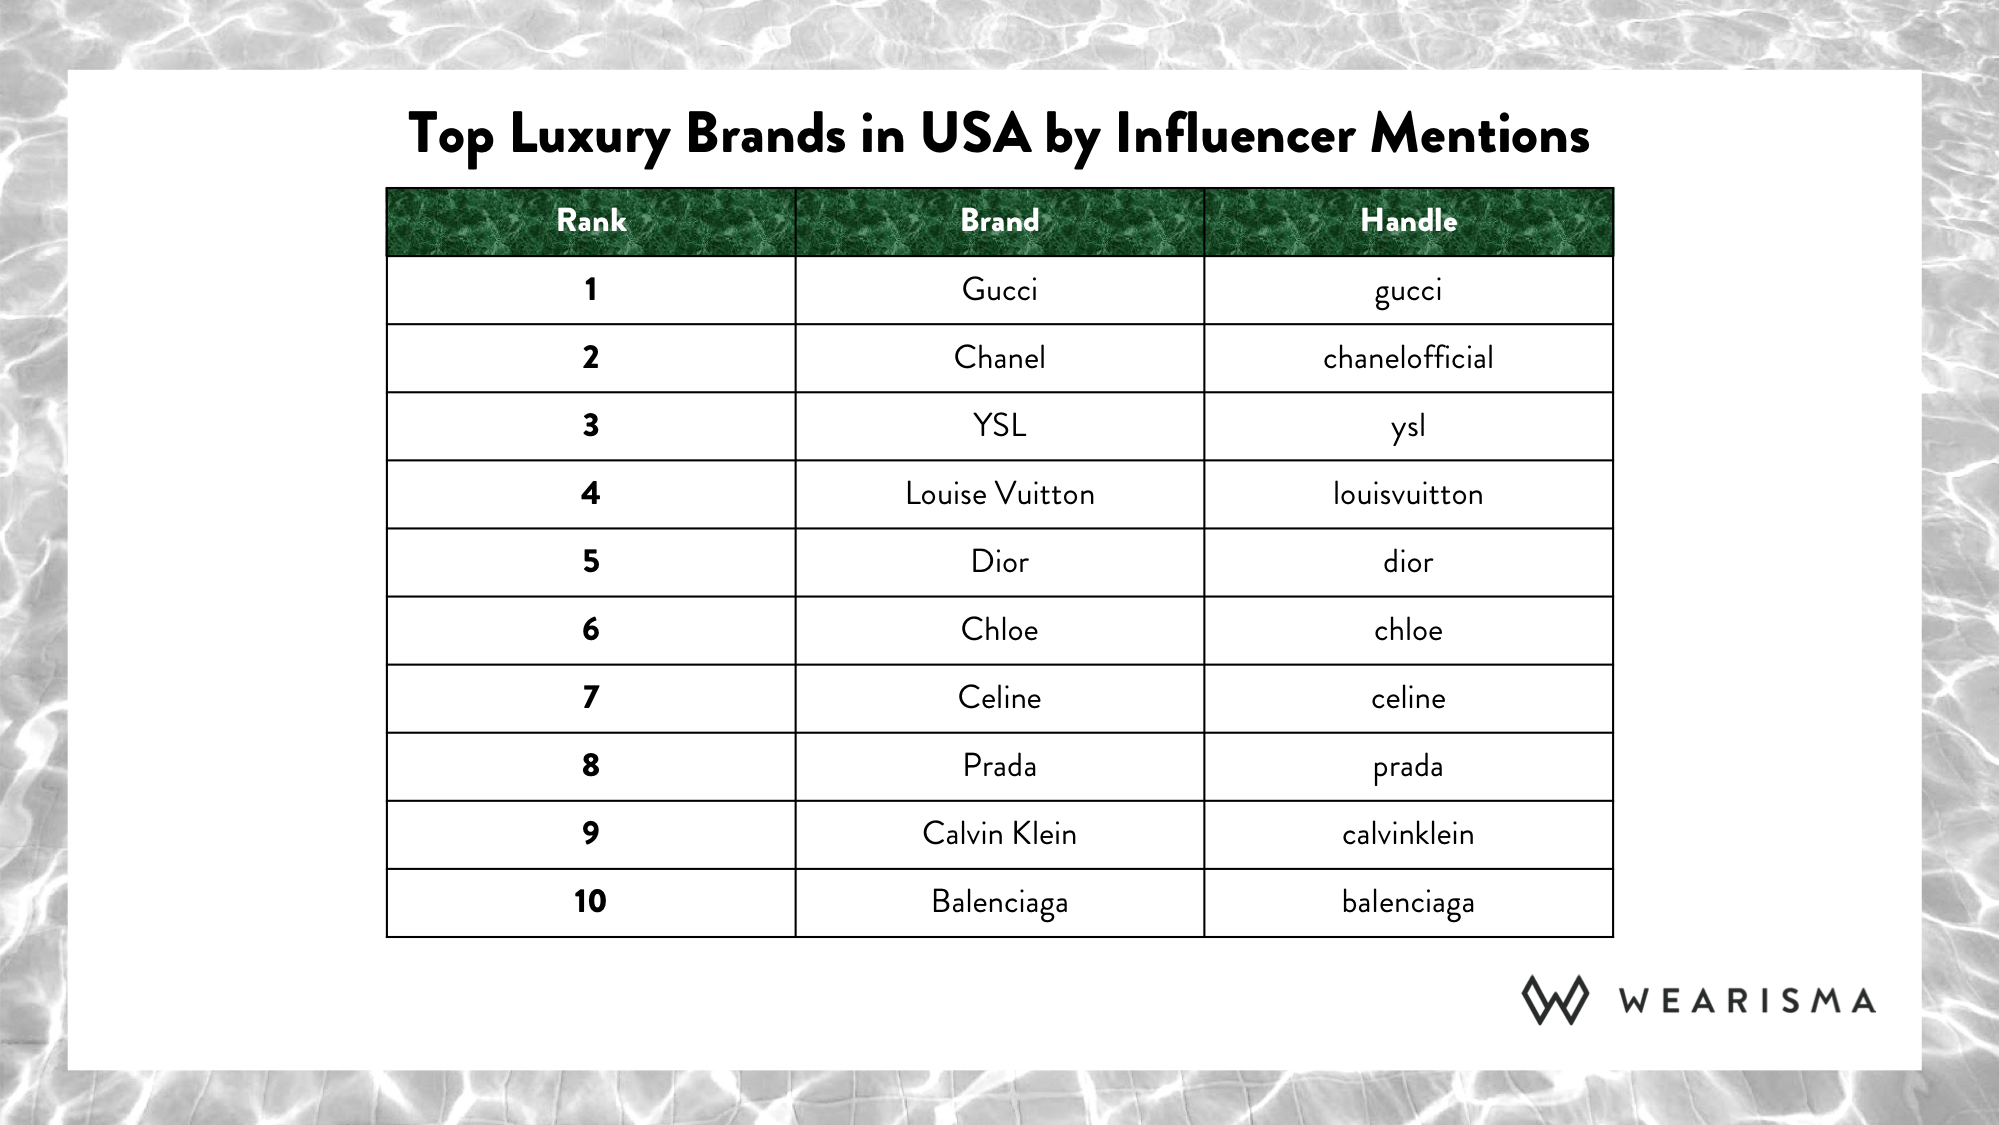 Which Luxury Giants are the most mentioned by USA Influencers? - WeArisma